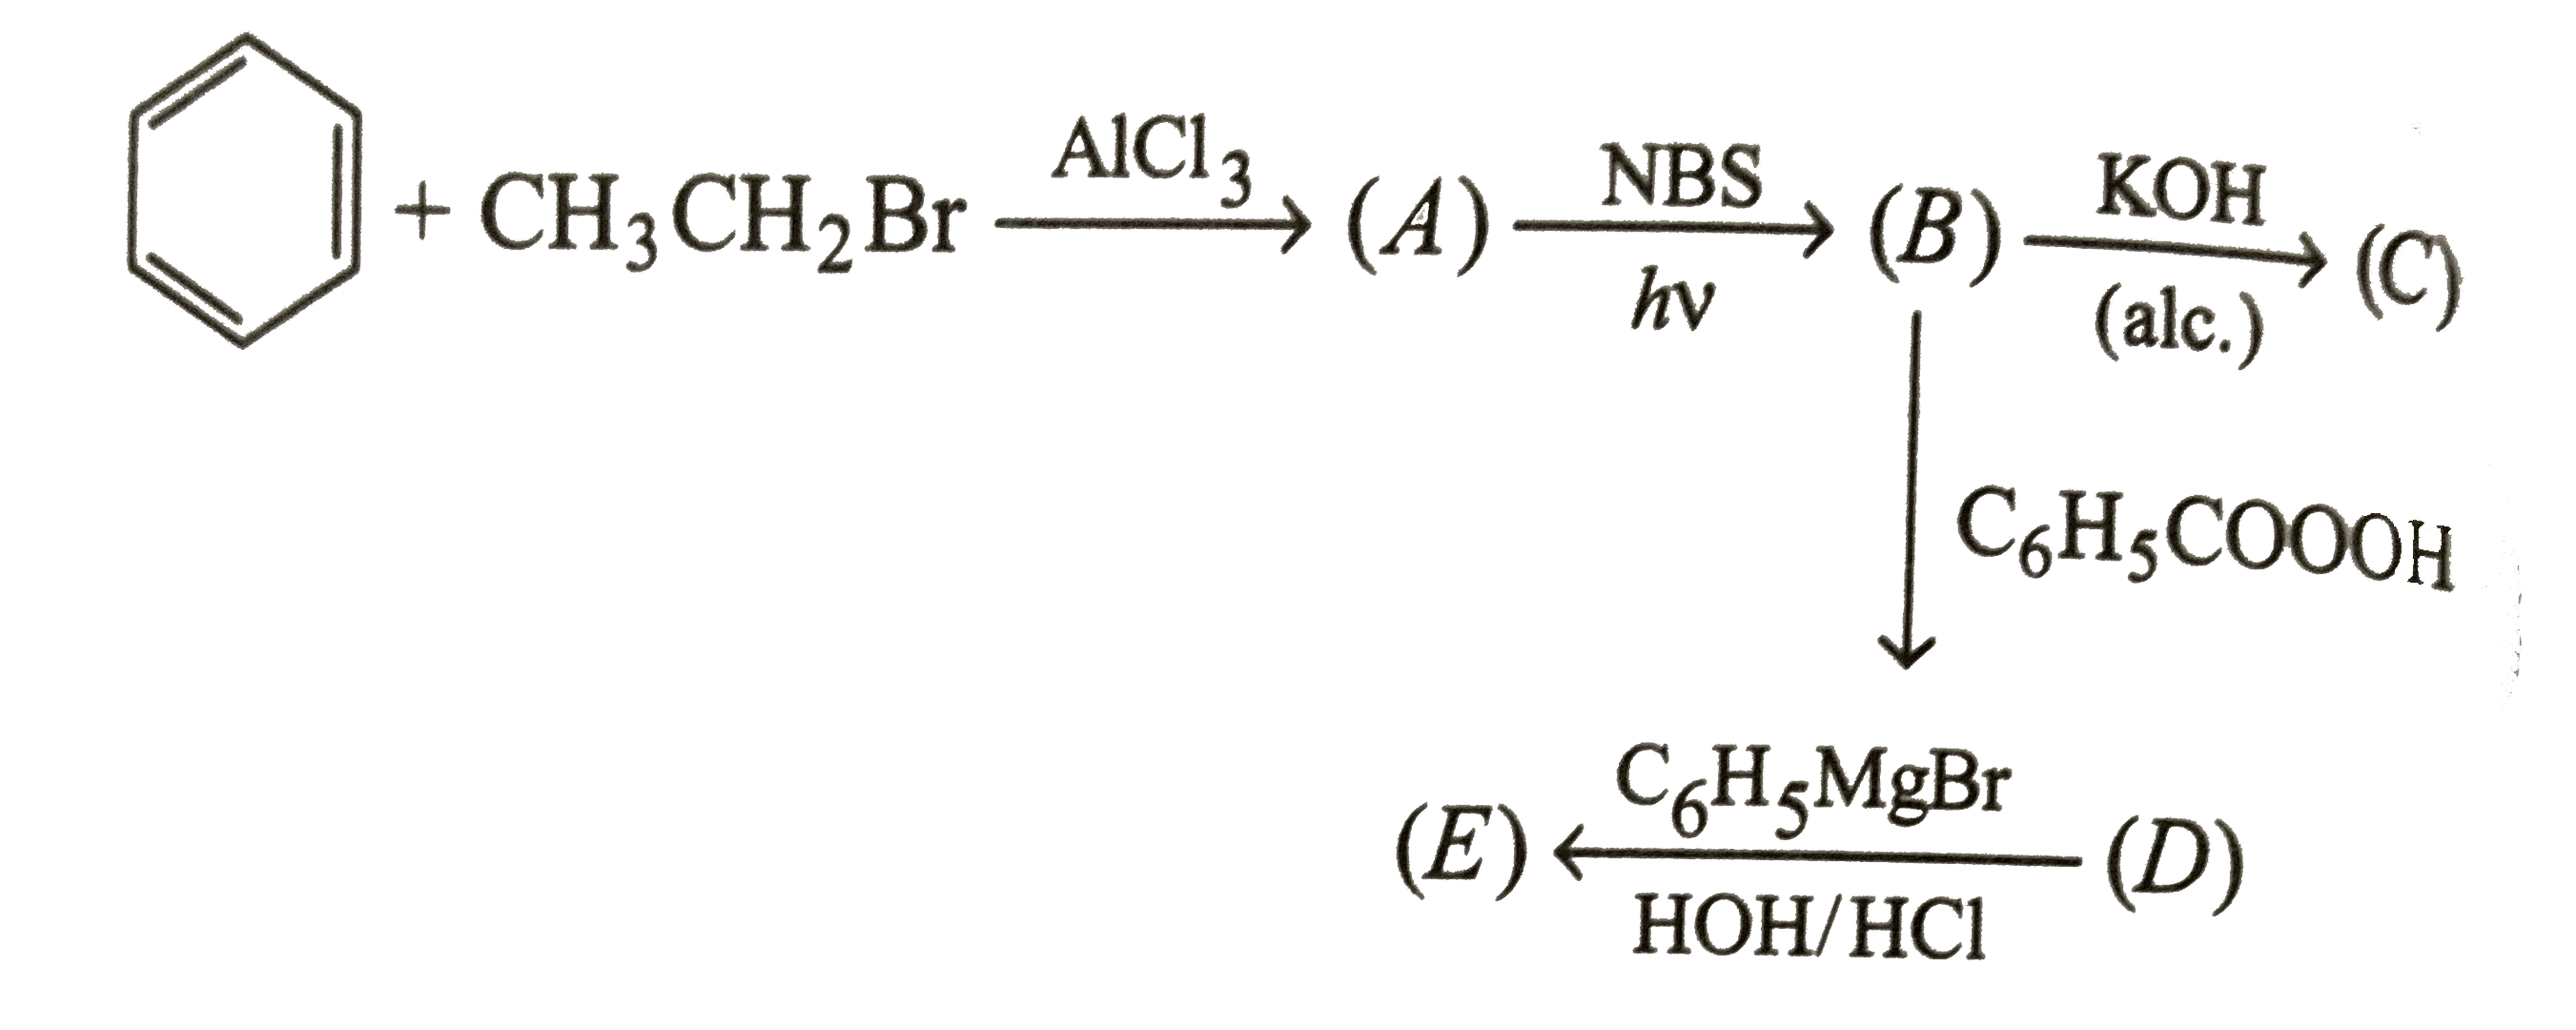 Complete the following chain of reactions